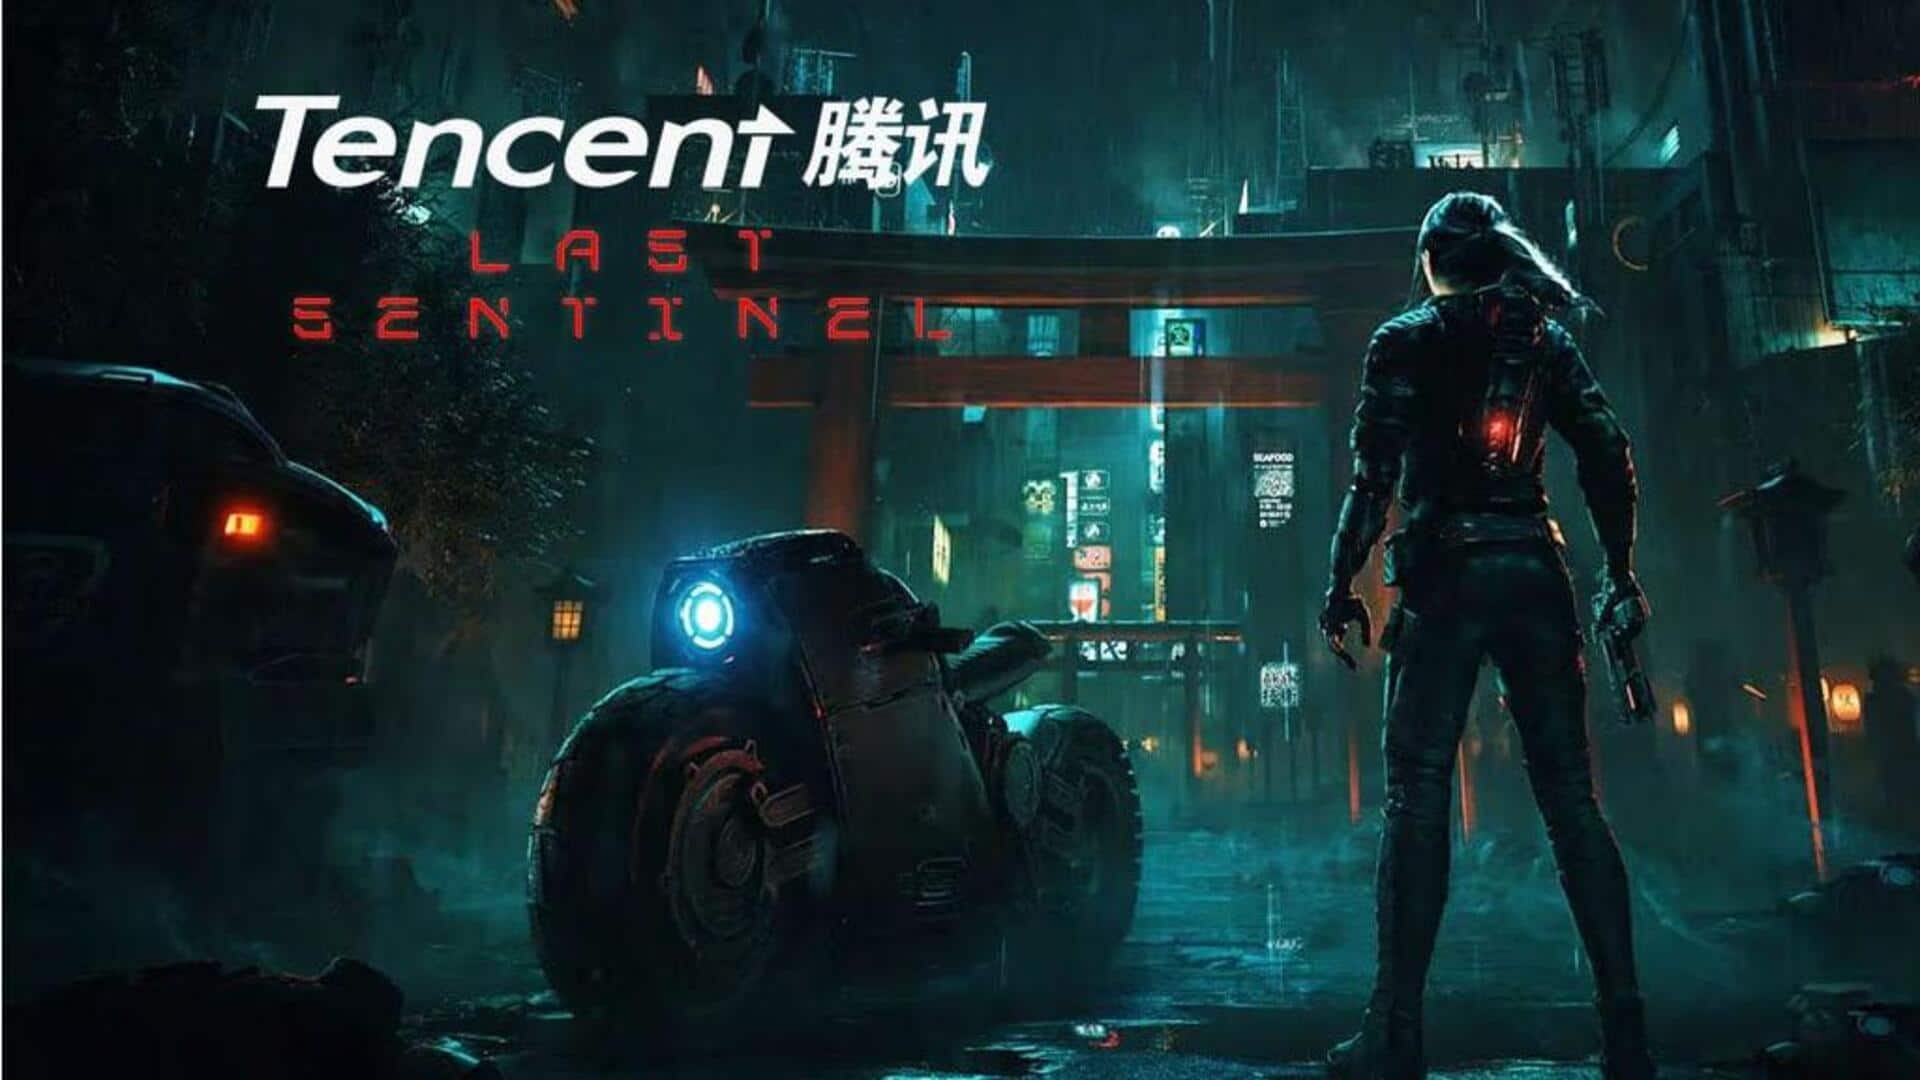 PUBG Mobile-developer Tencent eyes big-budget console gaming with 'Last Sentinel'